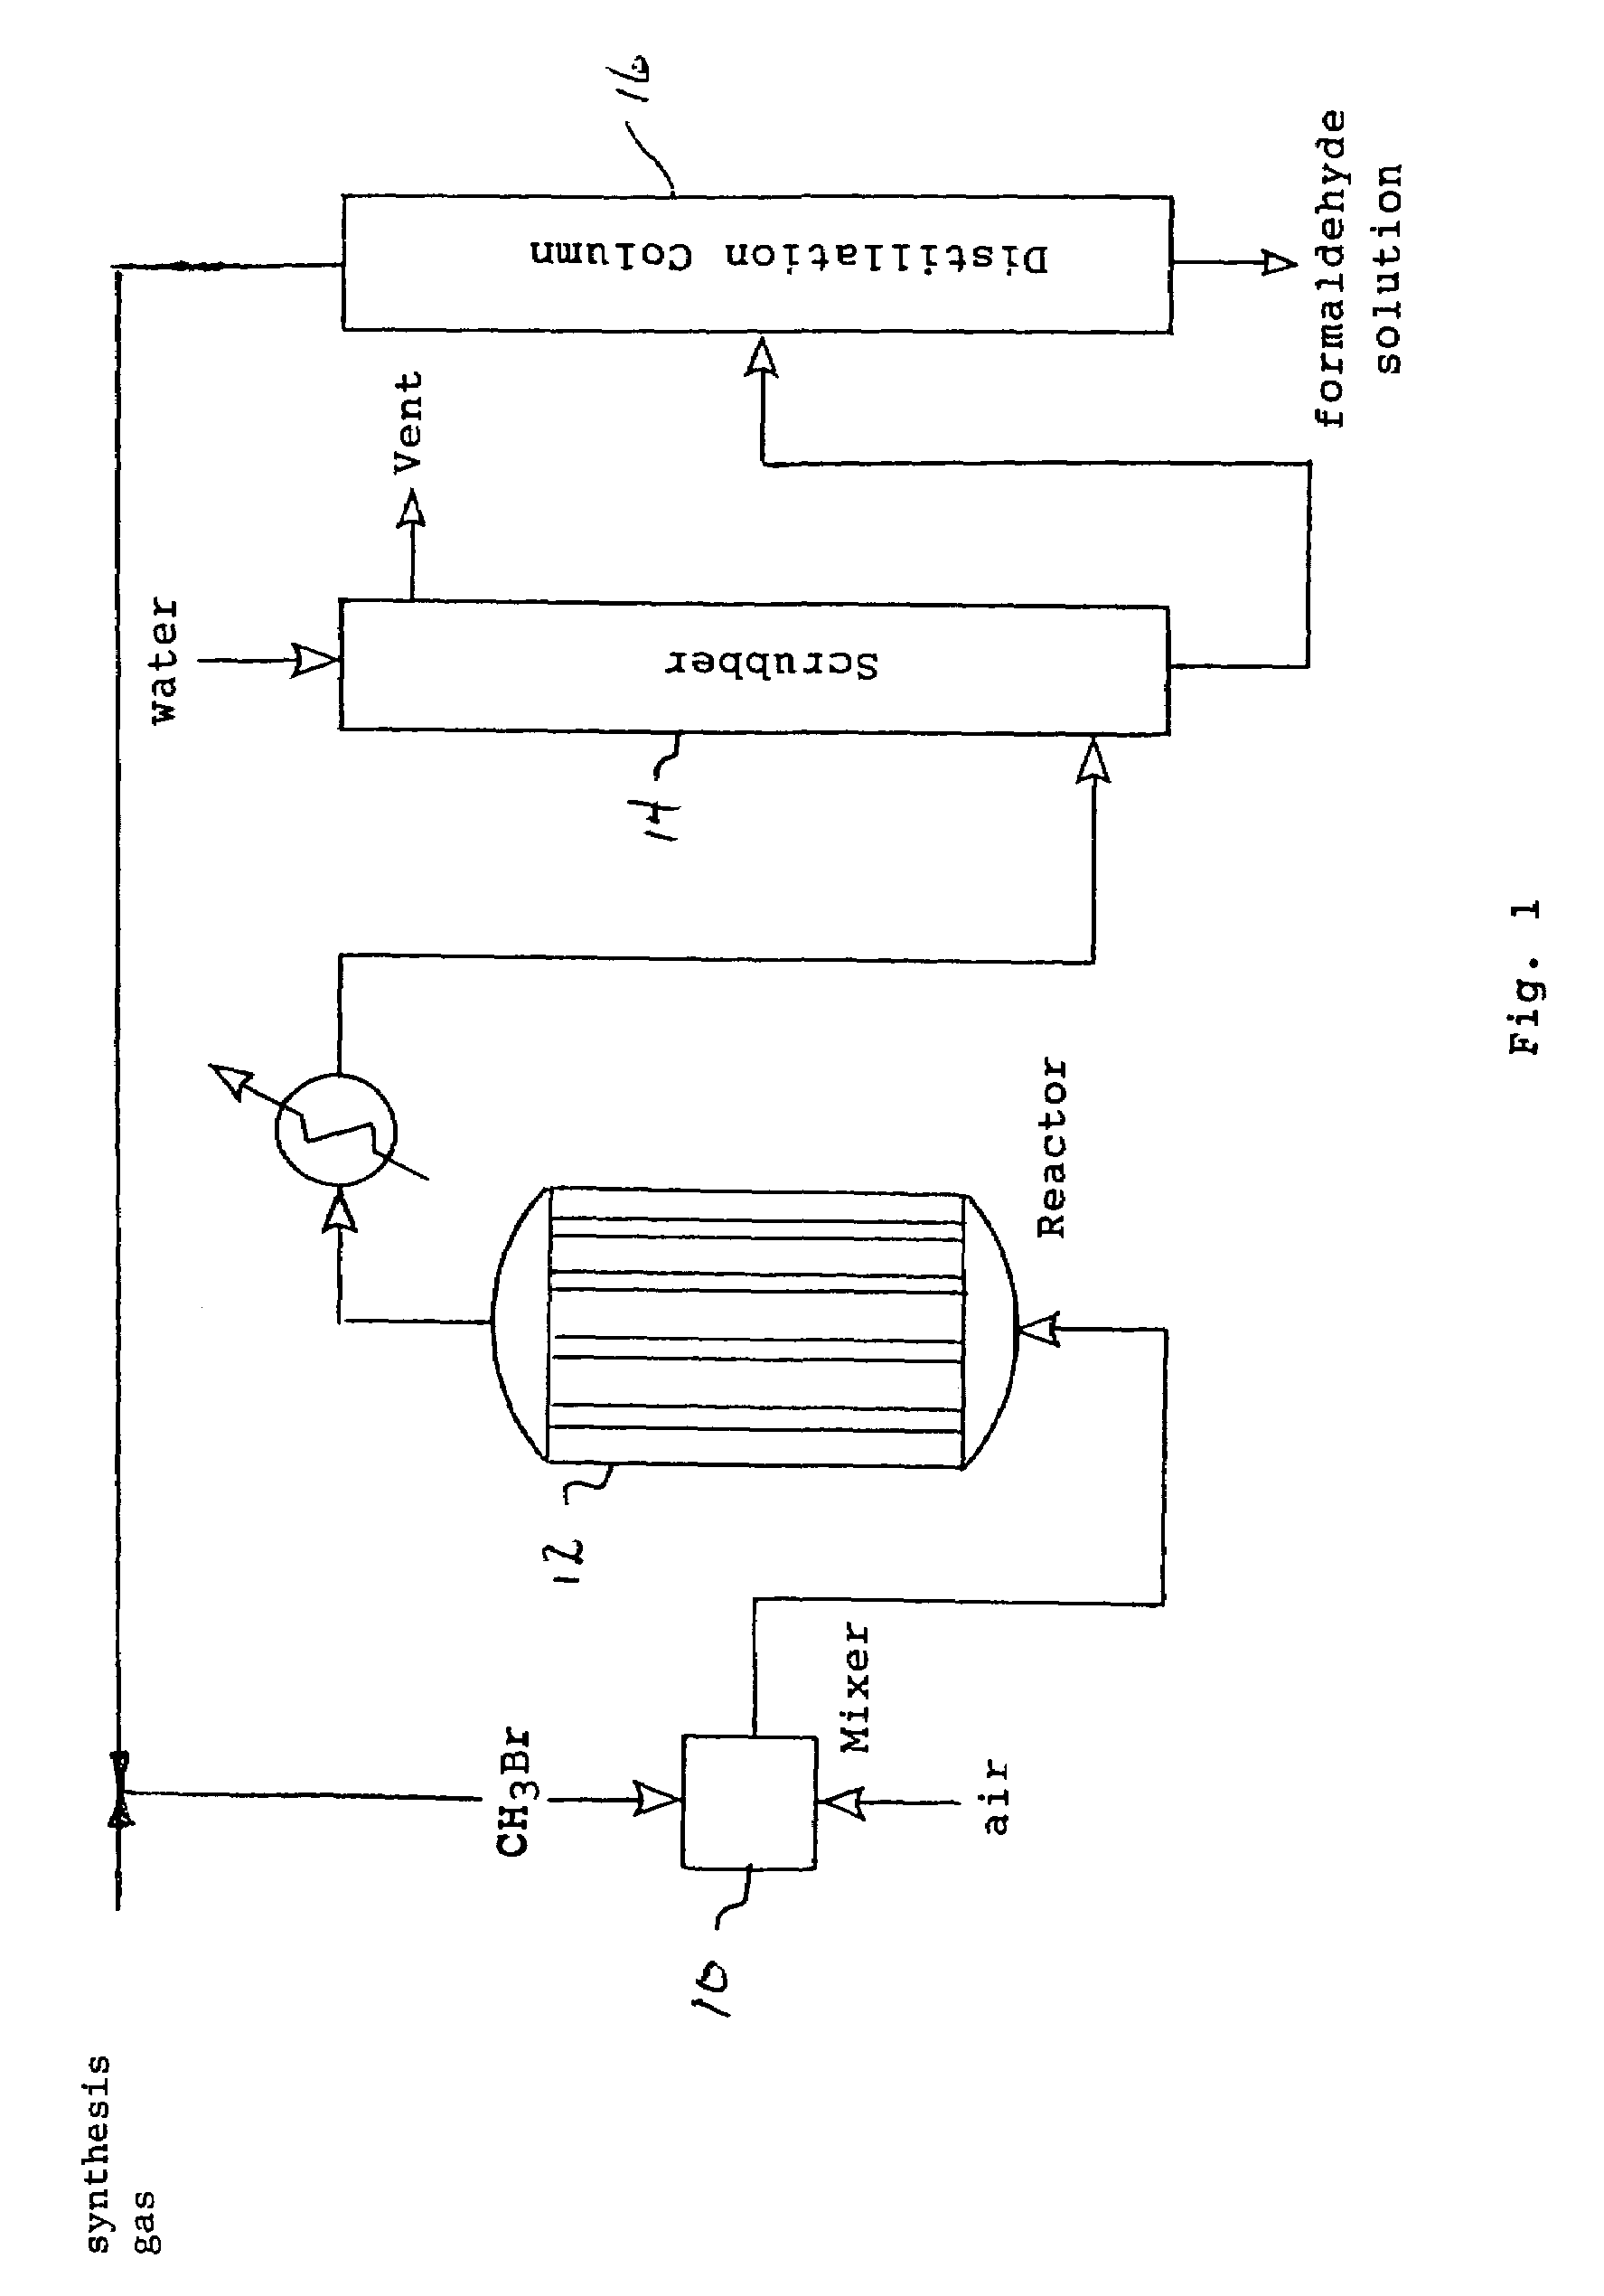 Manufacture of formaldehyde from methyl bromide